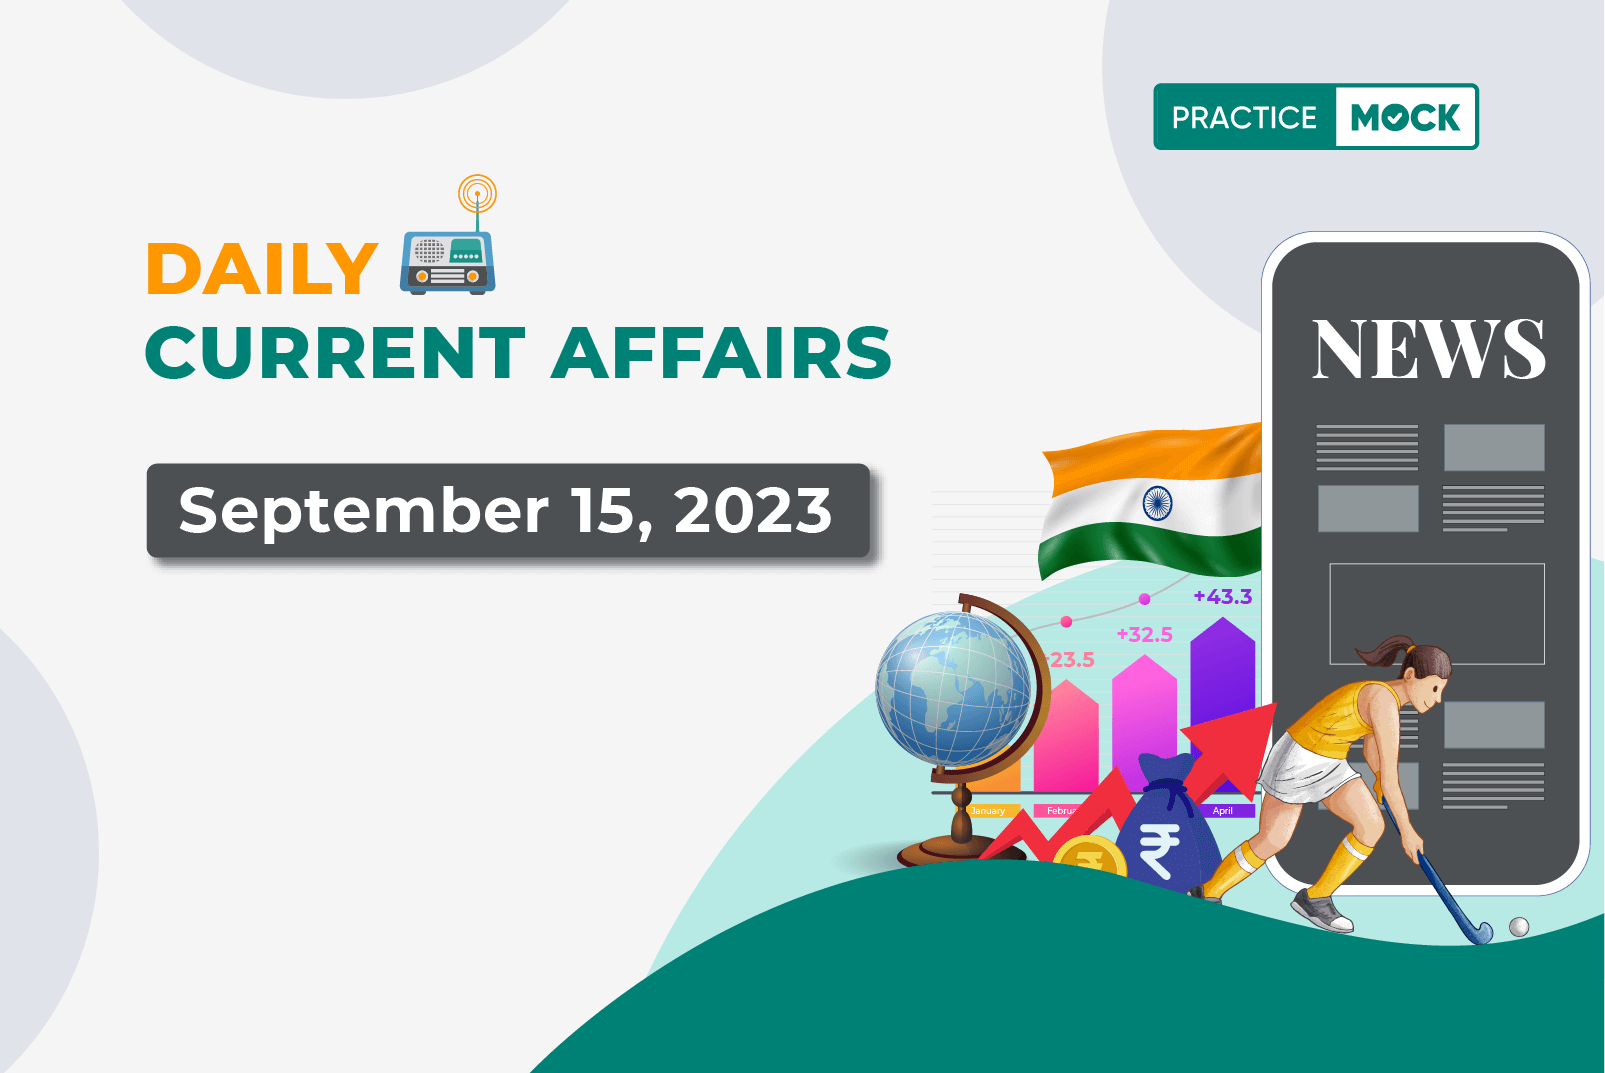 Daily Current Affairs- September 15, 2023